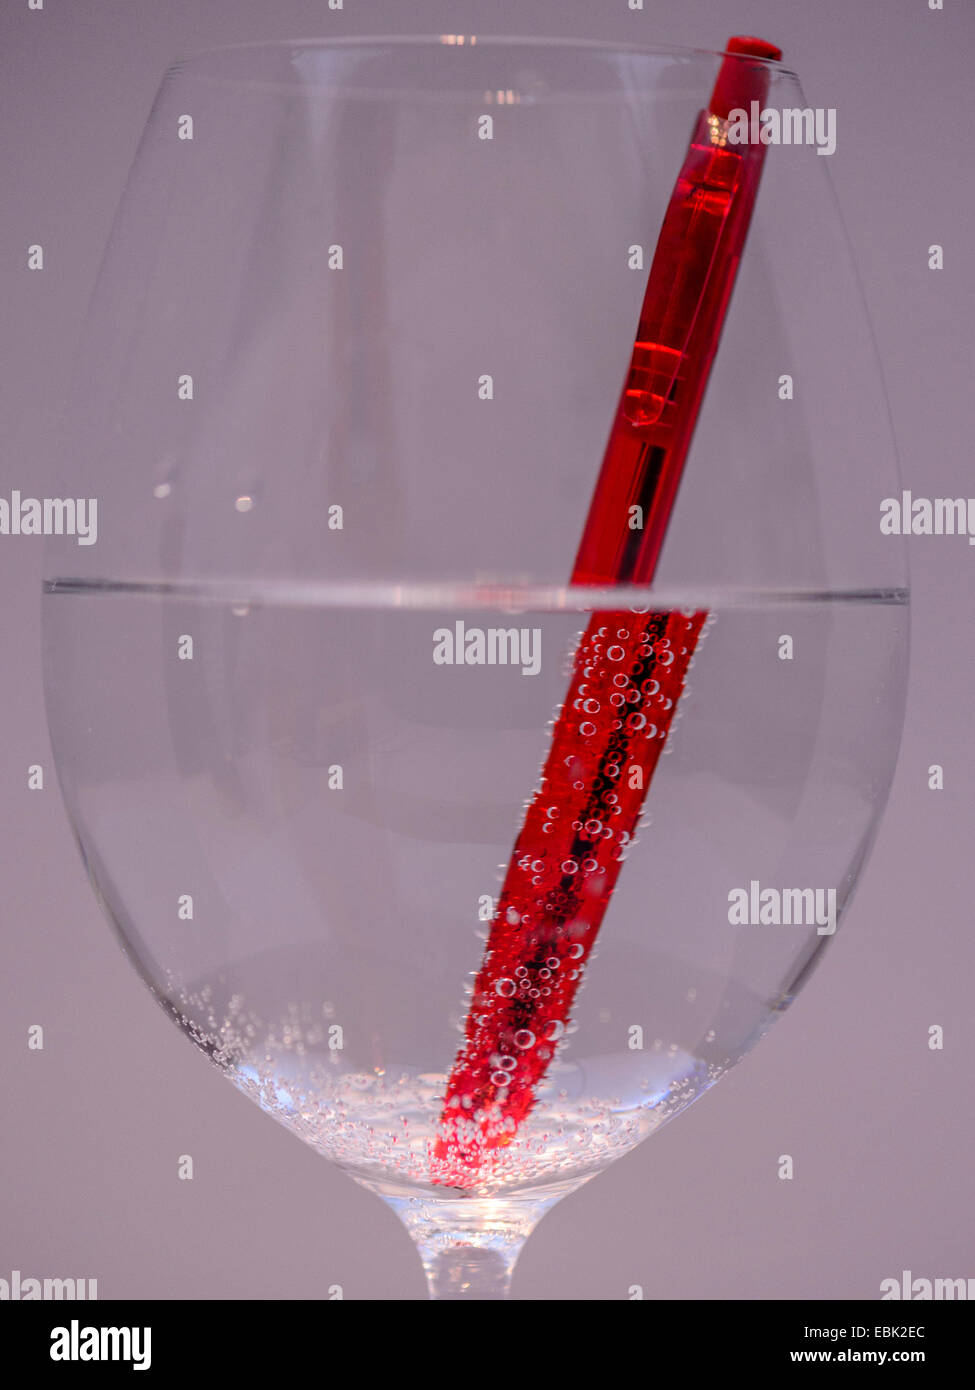 Studio macro image, vibrant red pen half immersed in a wine glass of sparkling water showing diffraction of the pen in water. Stock Photo